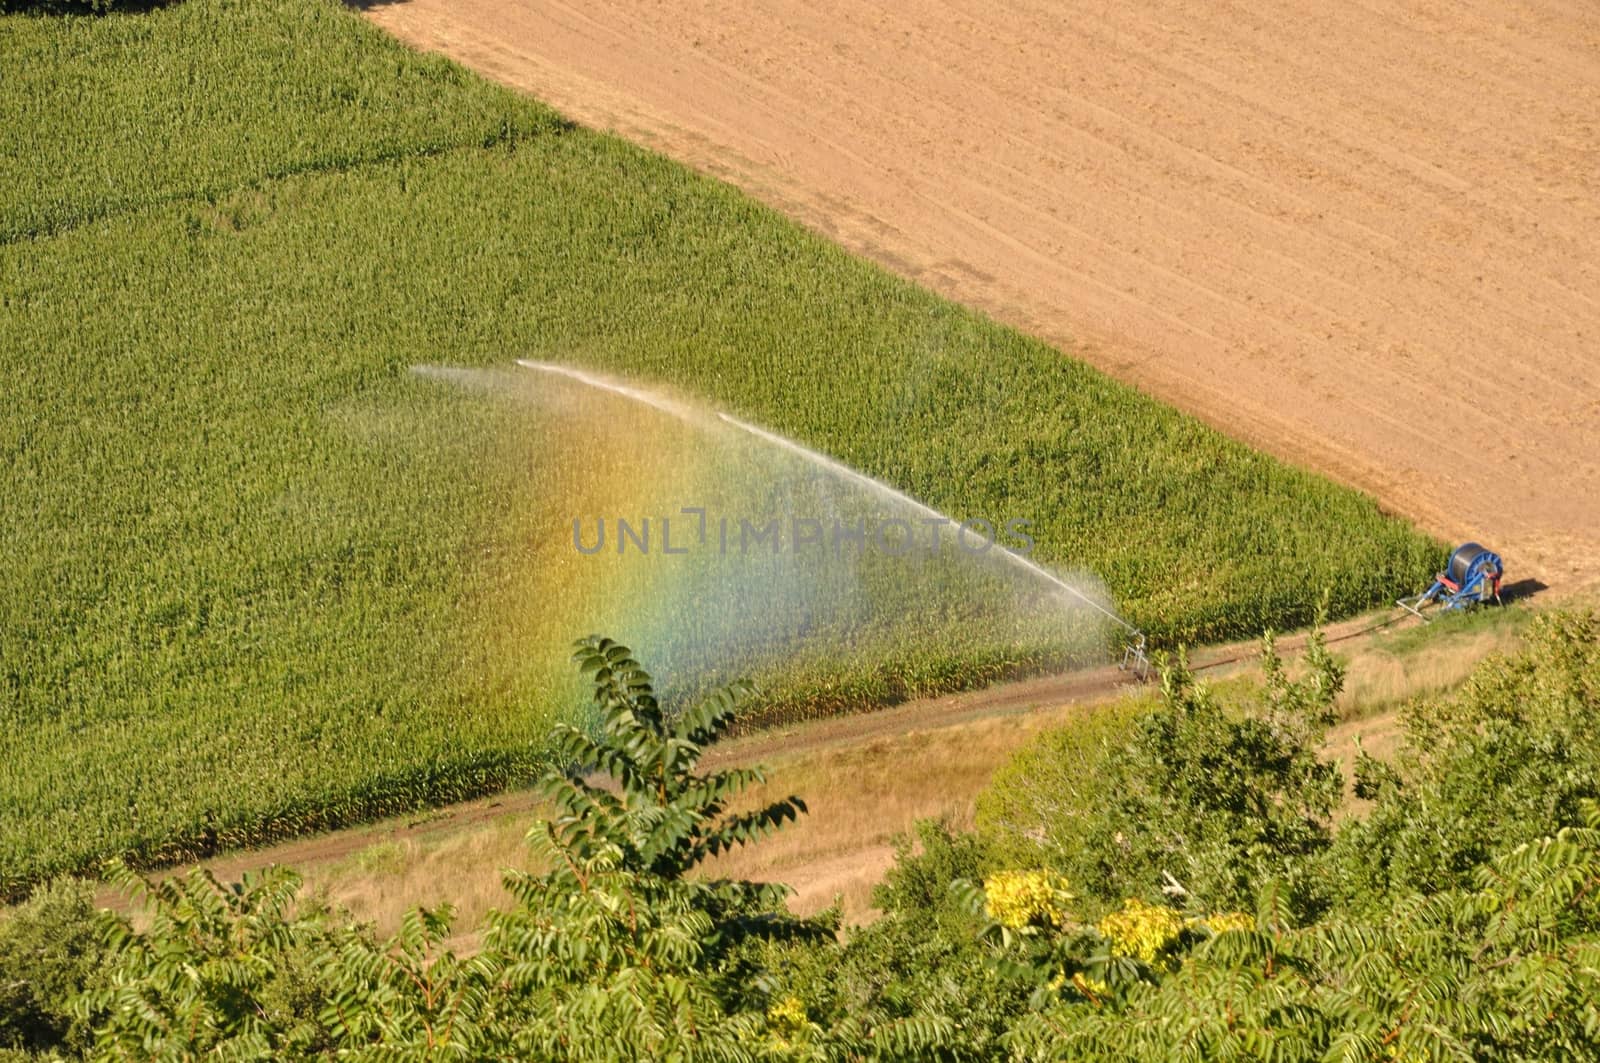 Water sprinkler installation in a field of maize, aerial view